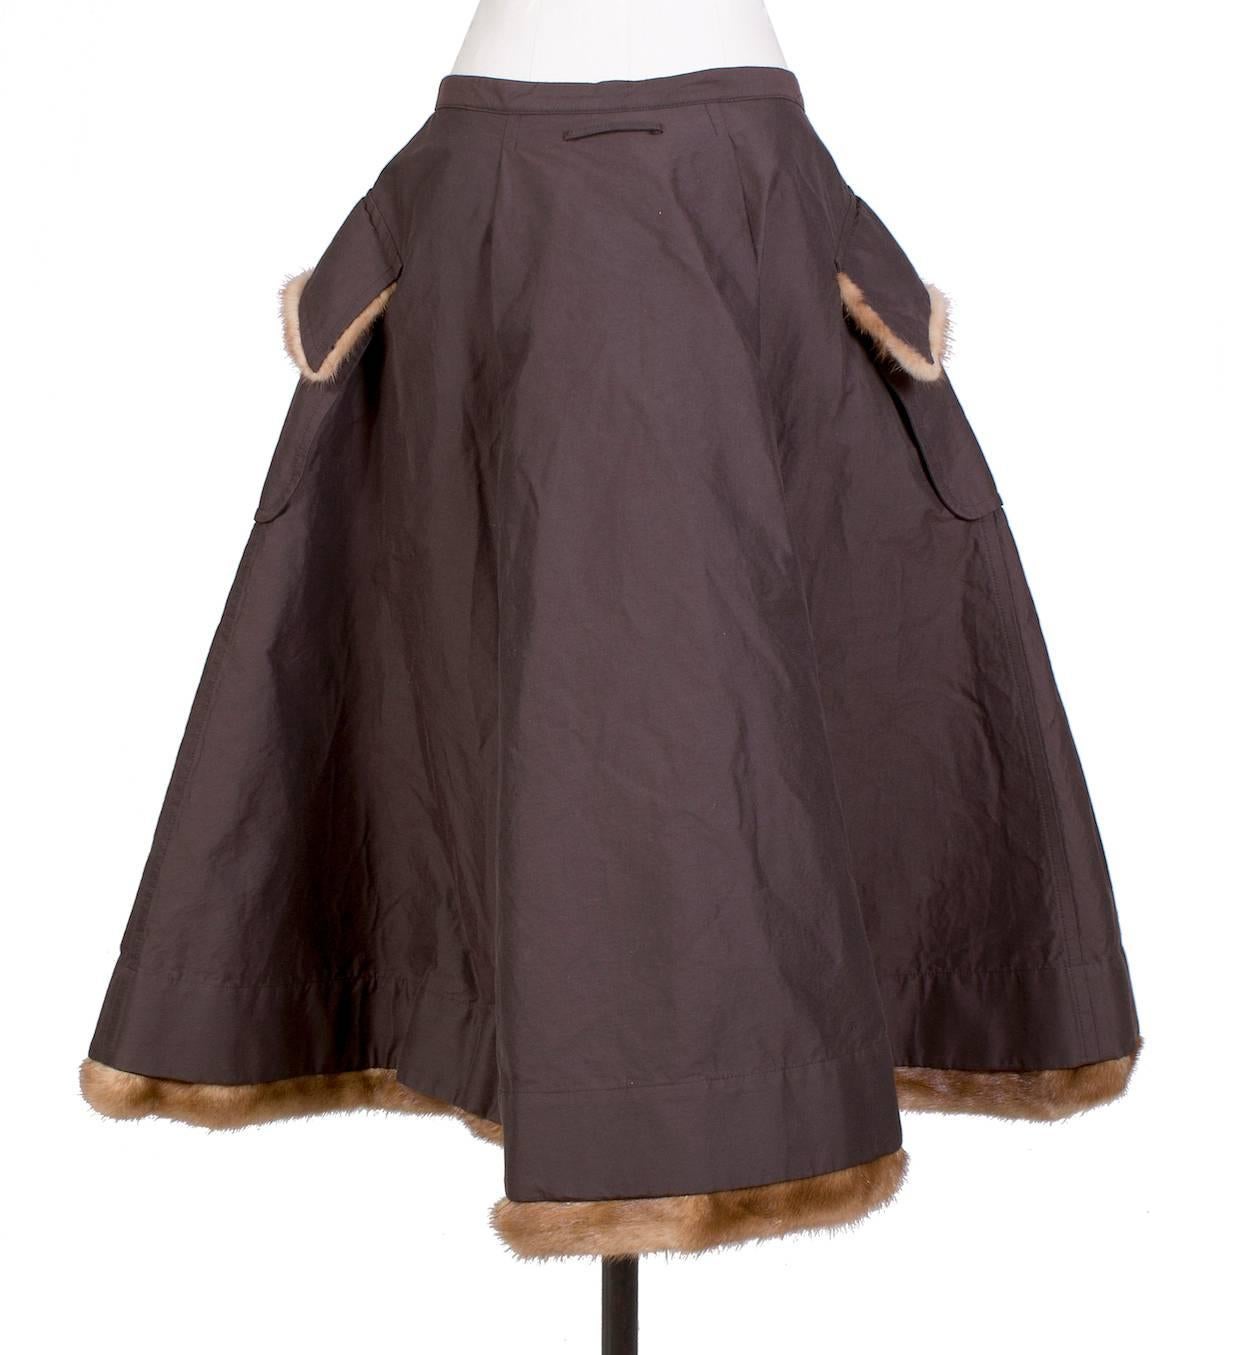 This is a circle skirt by Jean Paul Gaultier from his Fall 2005 Couture collection.  It features pockets and mink fur trim on the pockets flaps and the hem.  The closure is a front snap waist closure.